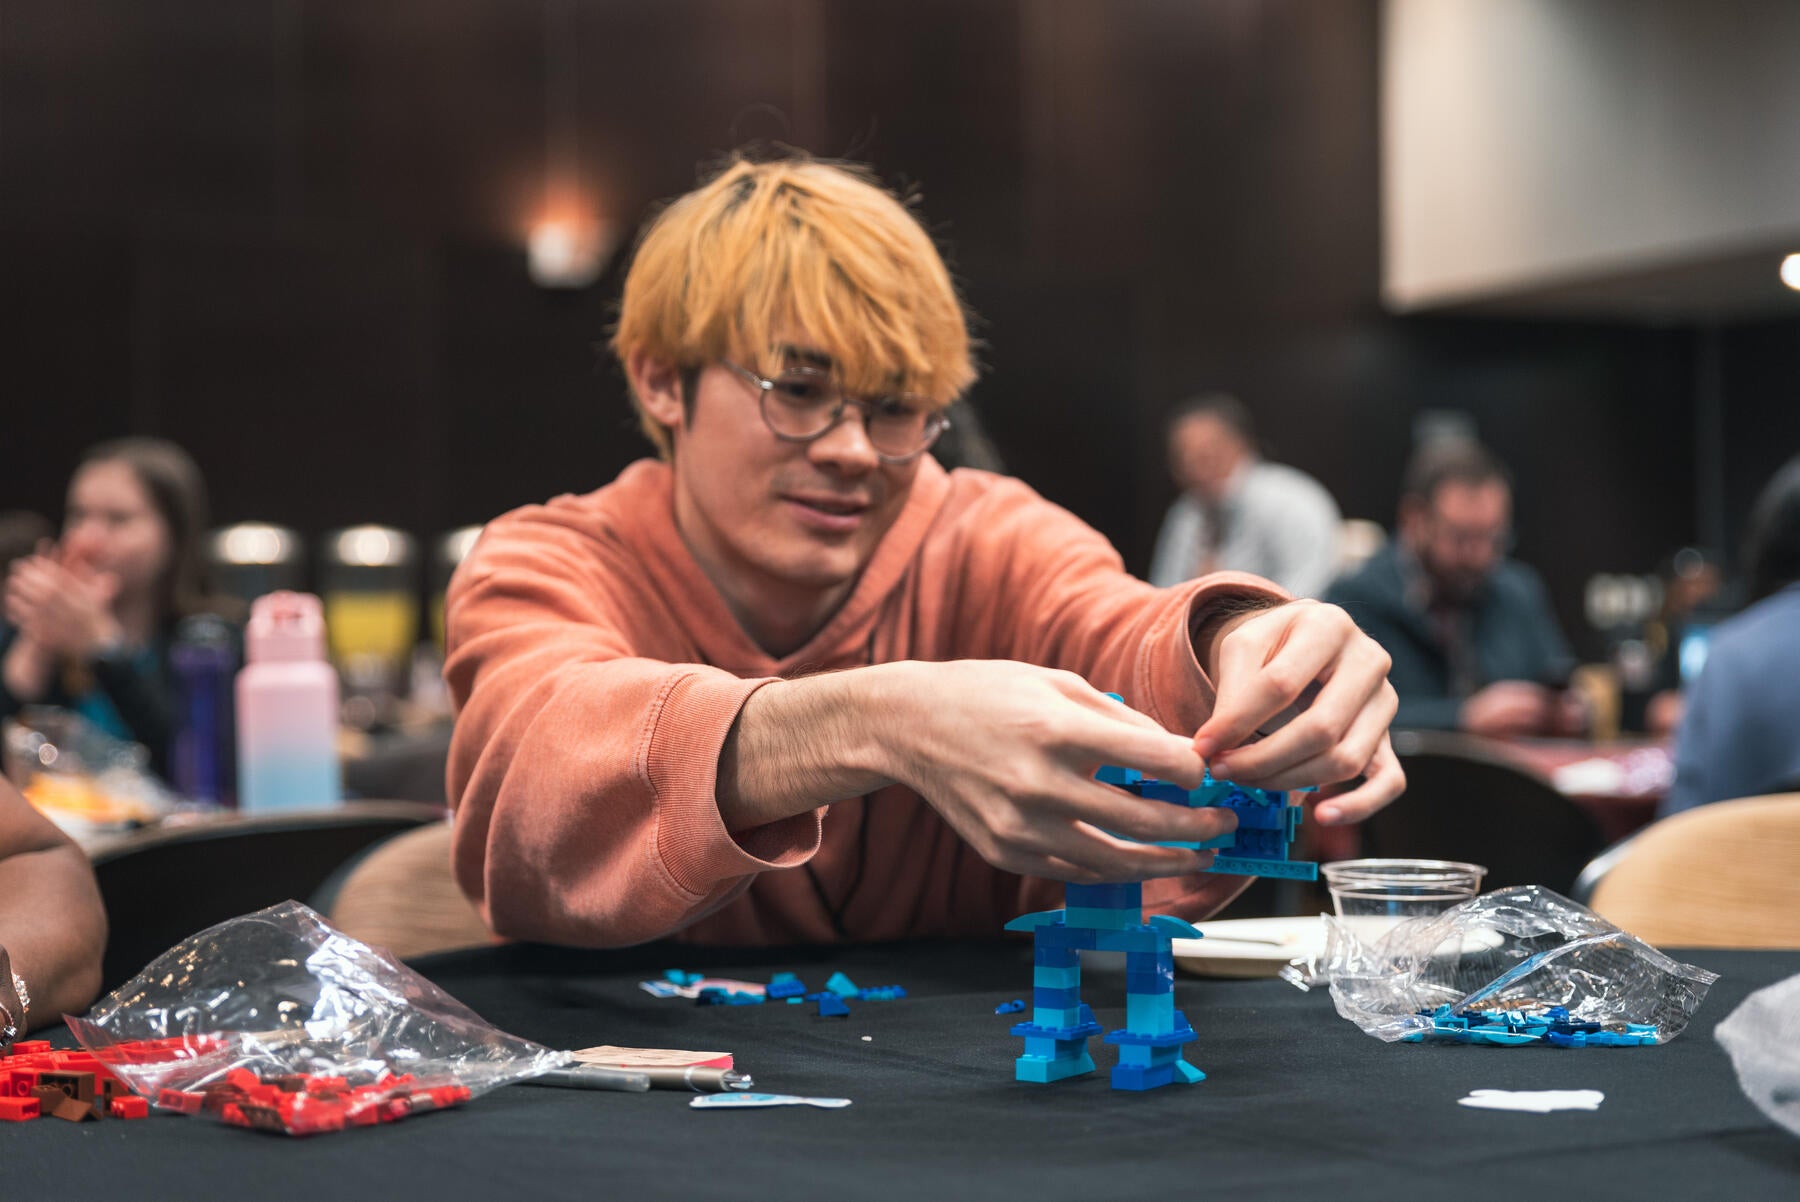 Person sitting at table building legos